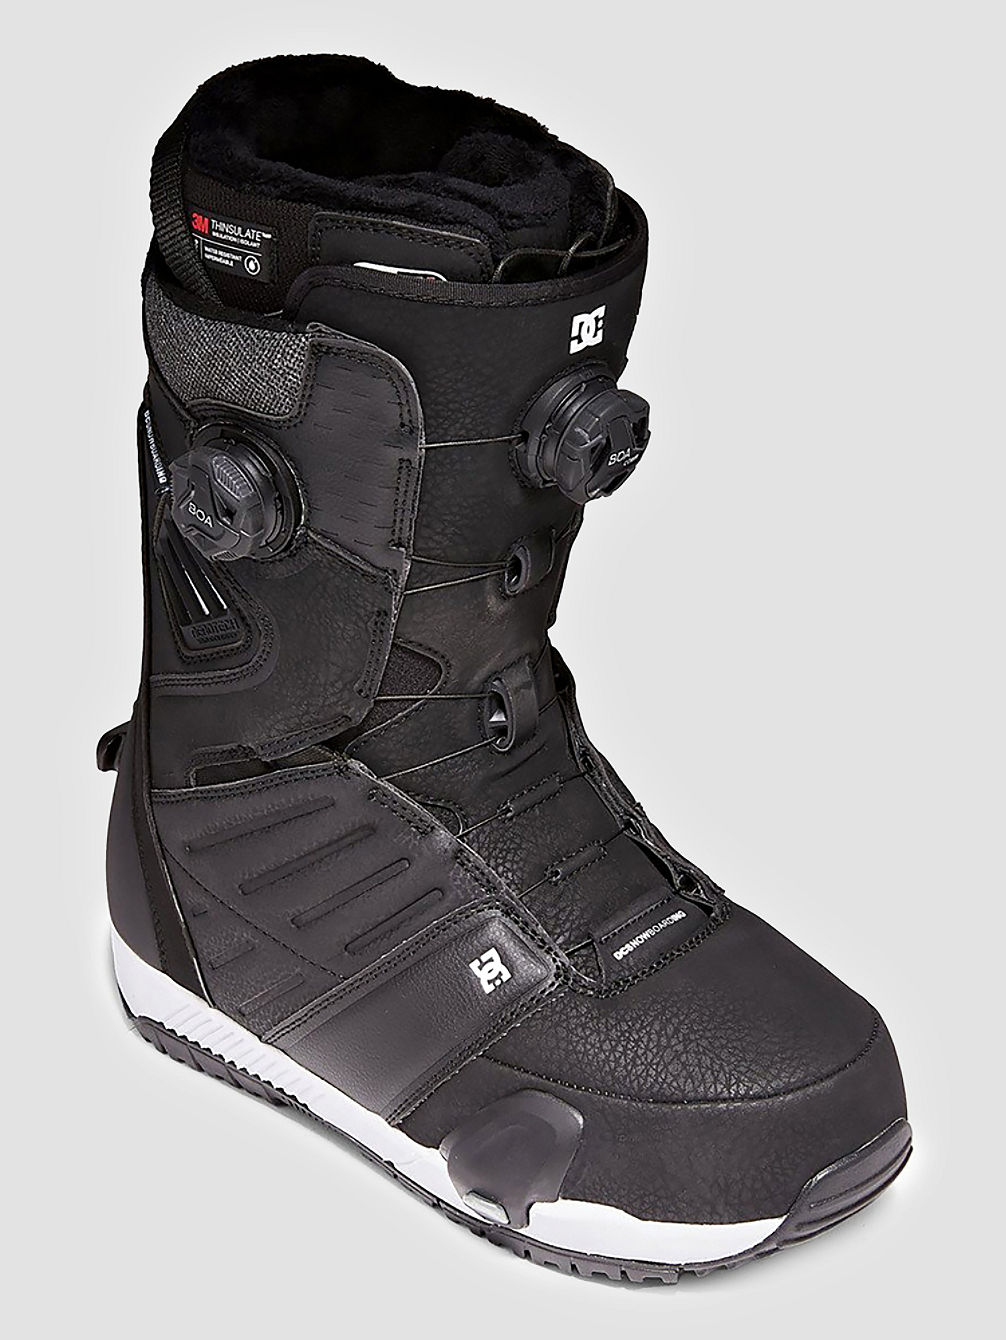 Judge Step On 2022 Snowboard Boots